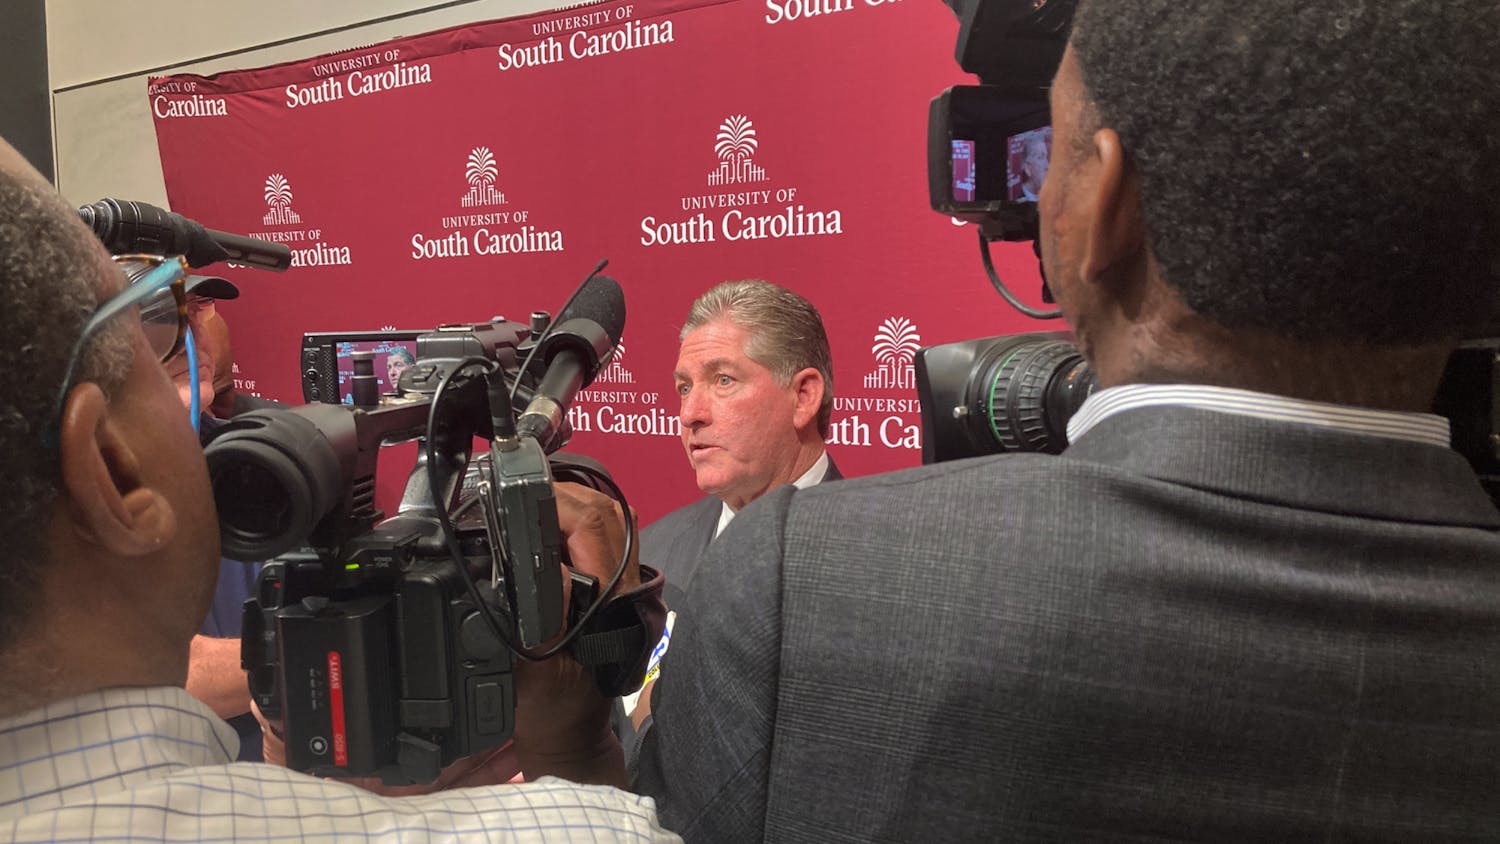 The University of South Carolina’s Athletic Director, Ray Tanner, states the recommendations to update the surrounding 889 acres around Williams-Brice Stadium on Feb. 7, 2023. The exact plan of what will be built has yet to be fully confirmed, but there is a possibility that the land will be turned into new student housing properties, apartments or restaurants.